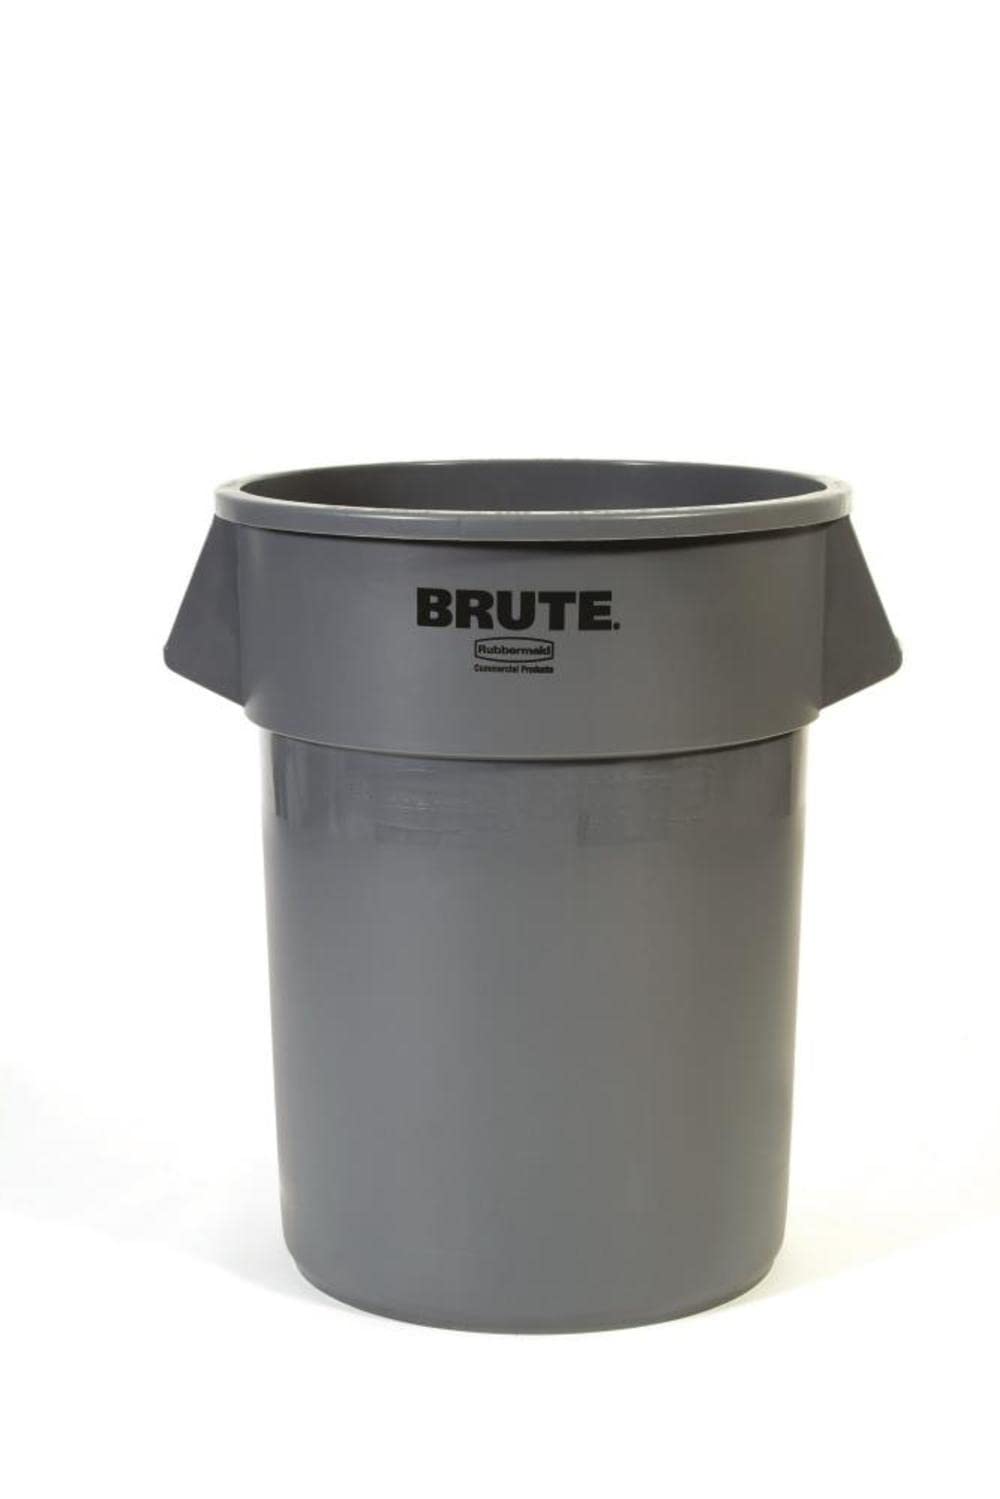 Rubbermaid Commercial 2655 Brute Round Container